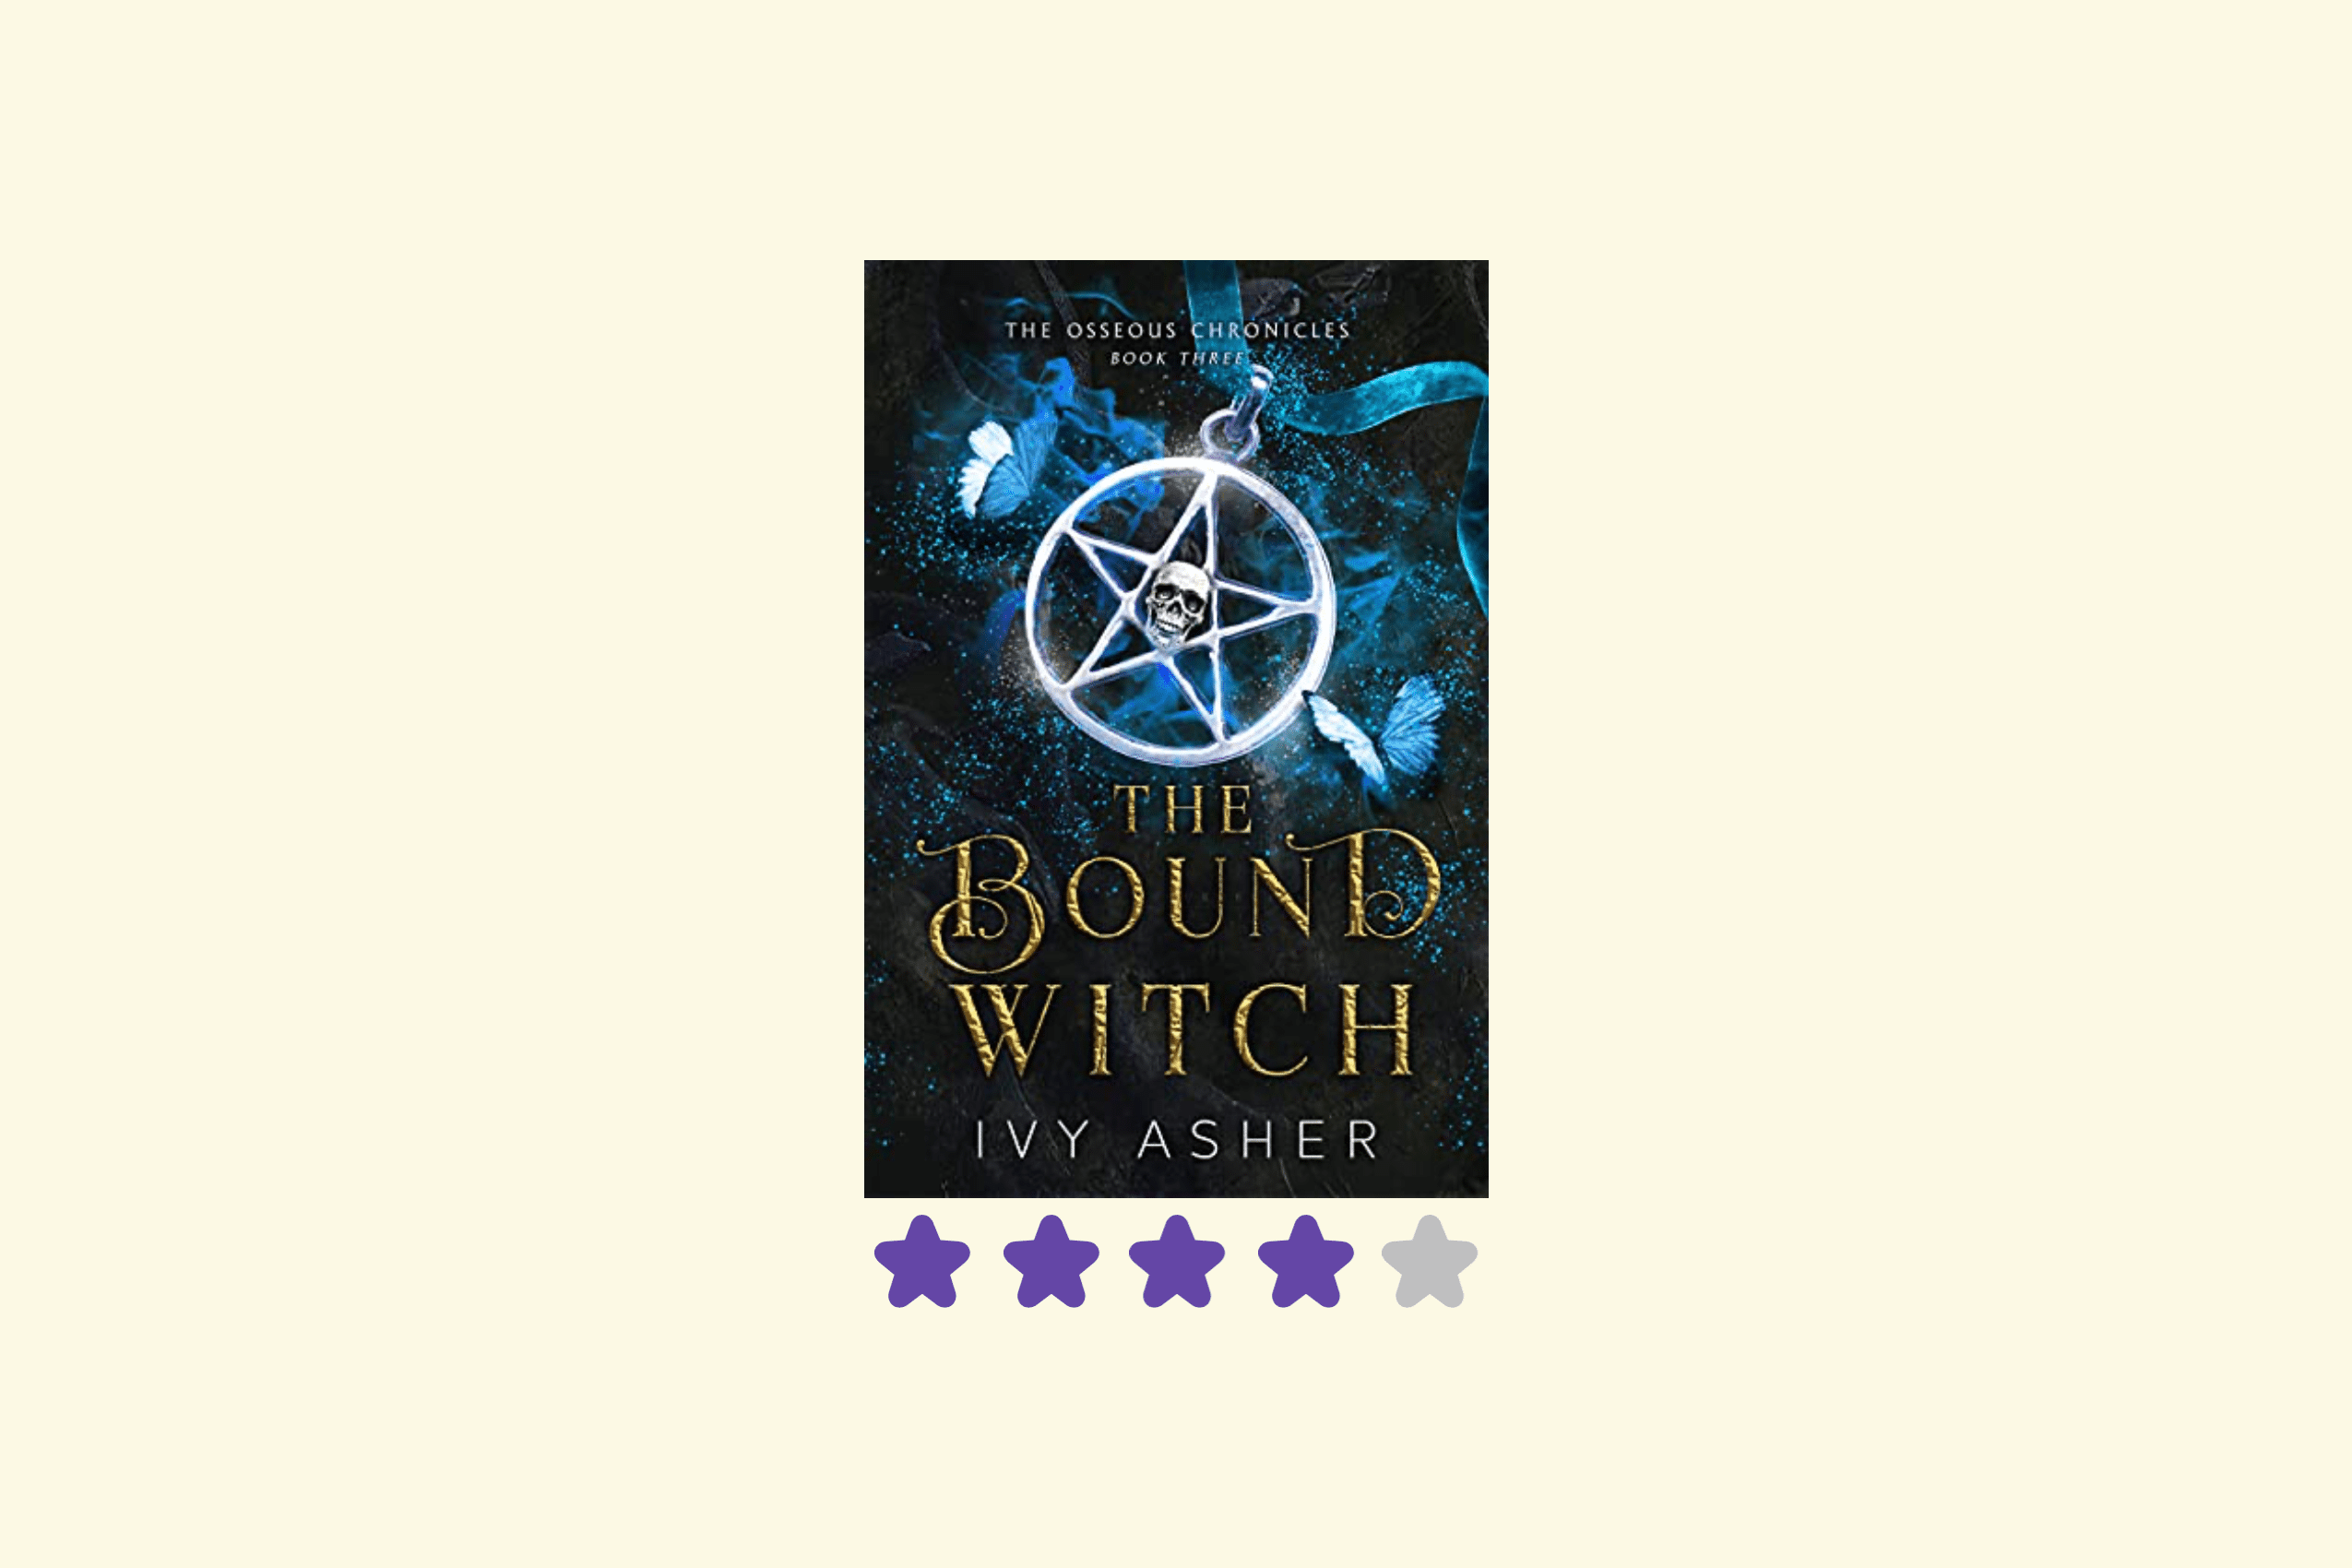 The Bound Witch (The Osseous Chronicles, #3) by Ivy Asher